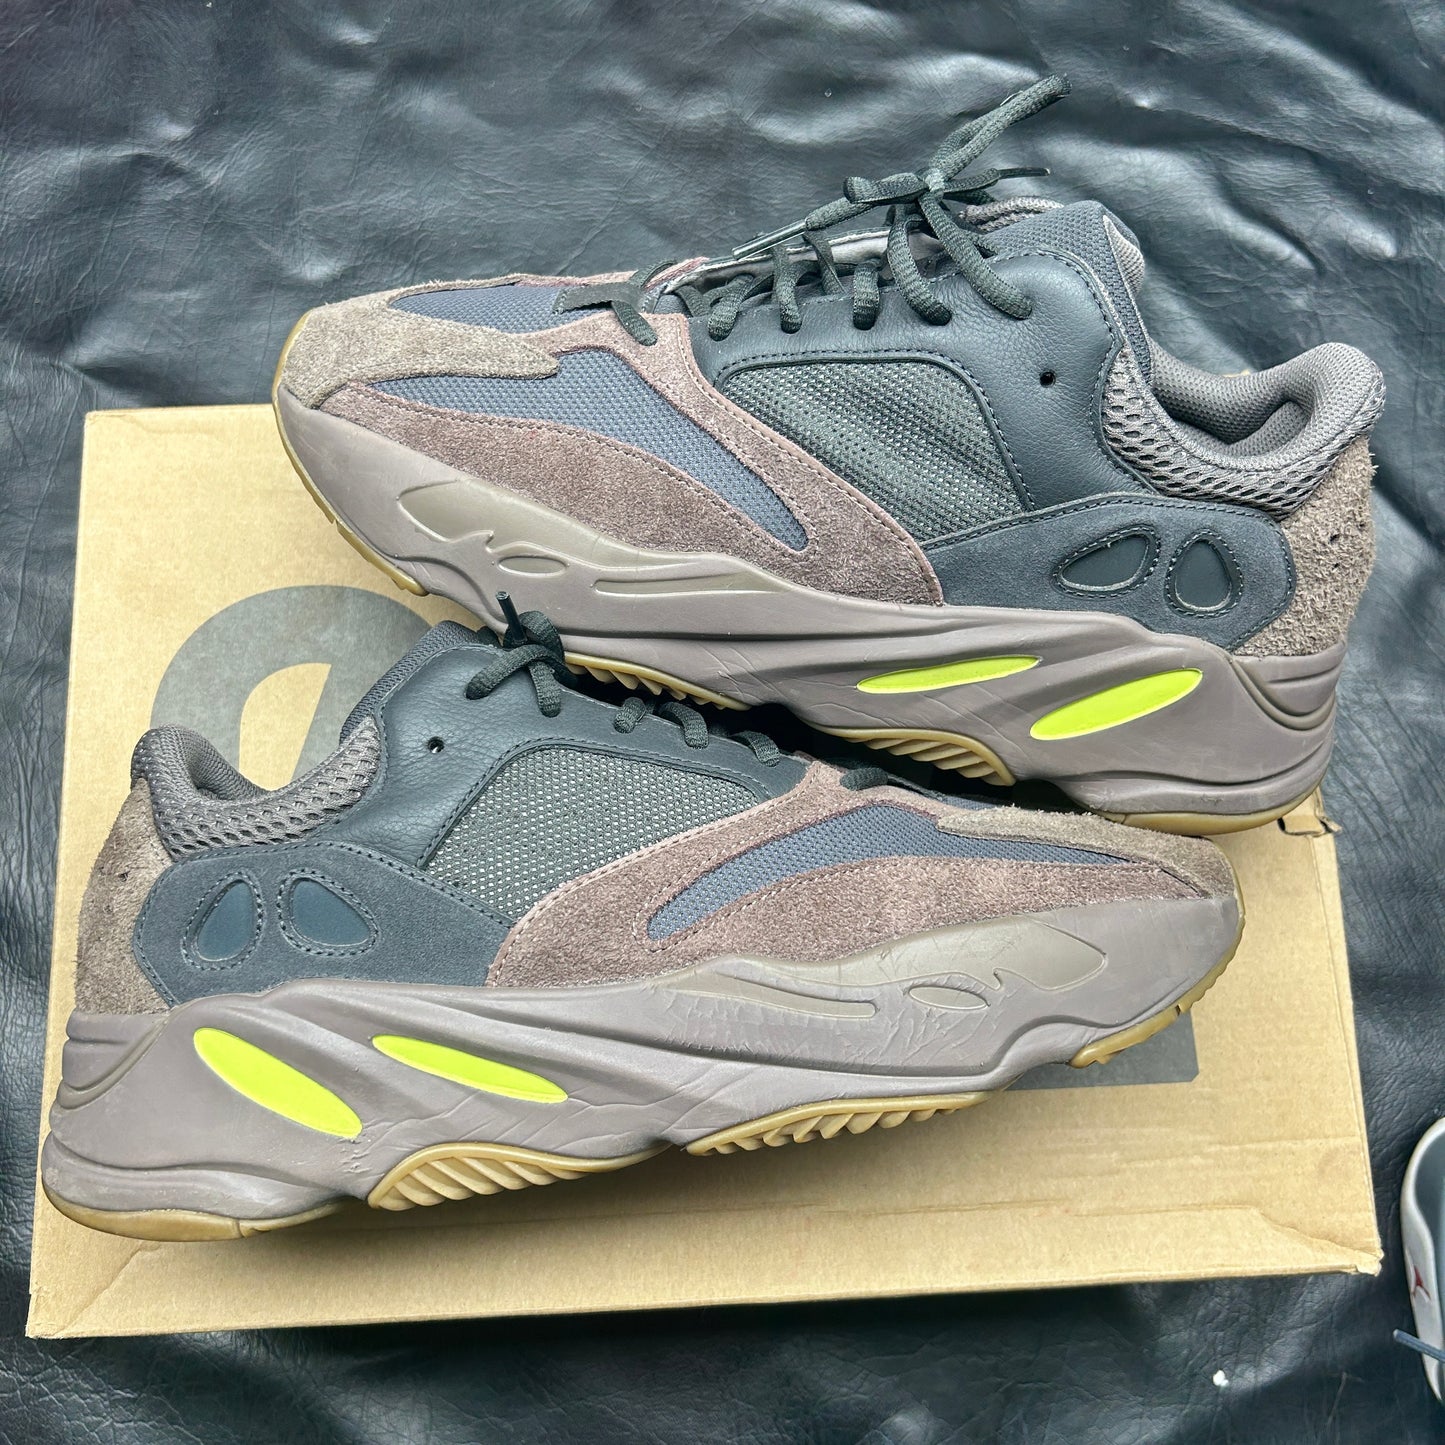 Yeezy 700 Mauve (Pre-Owned) Size 13